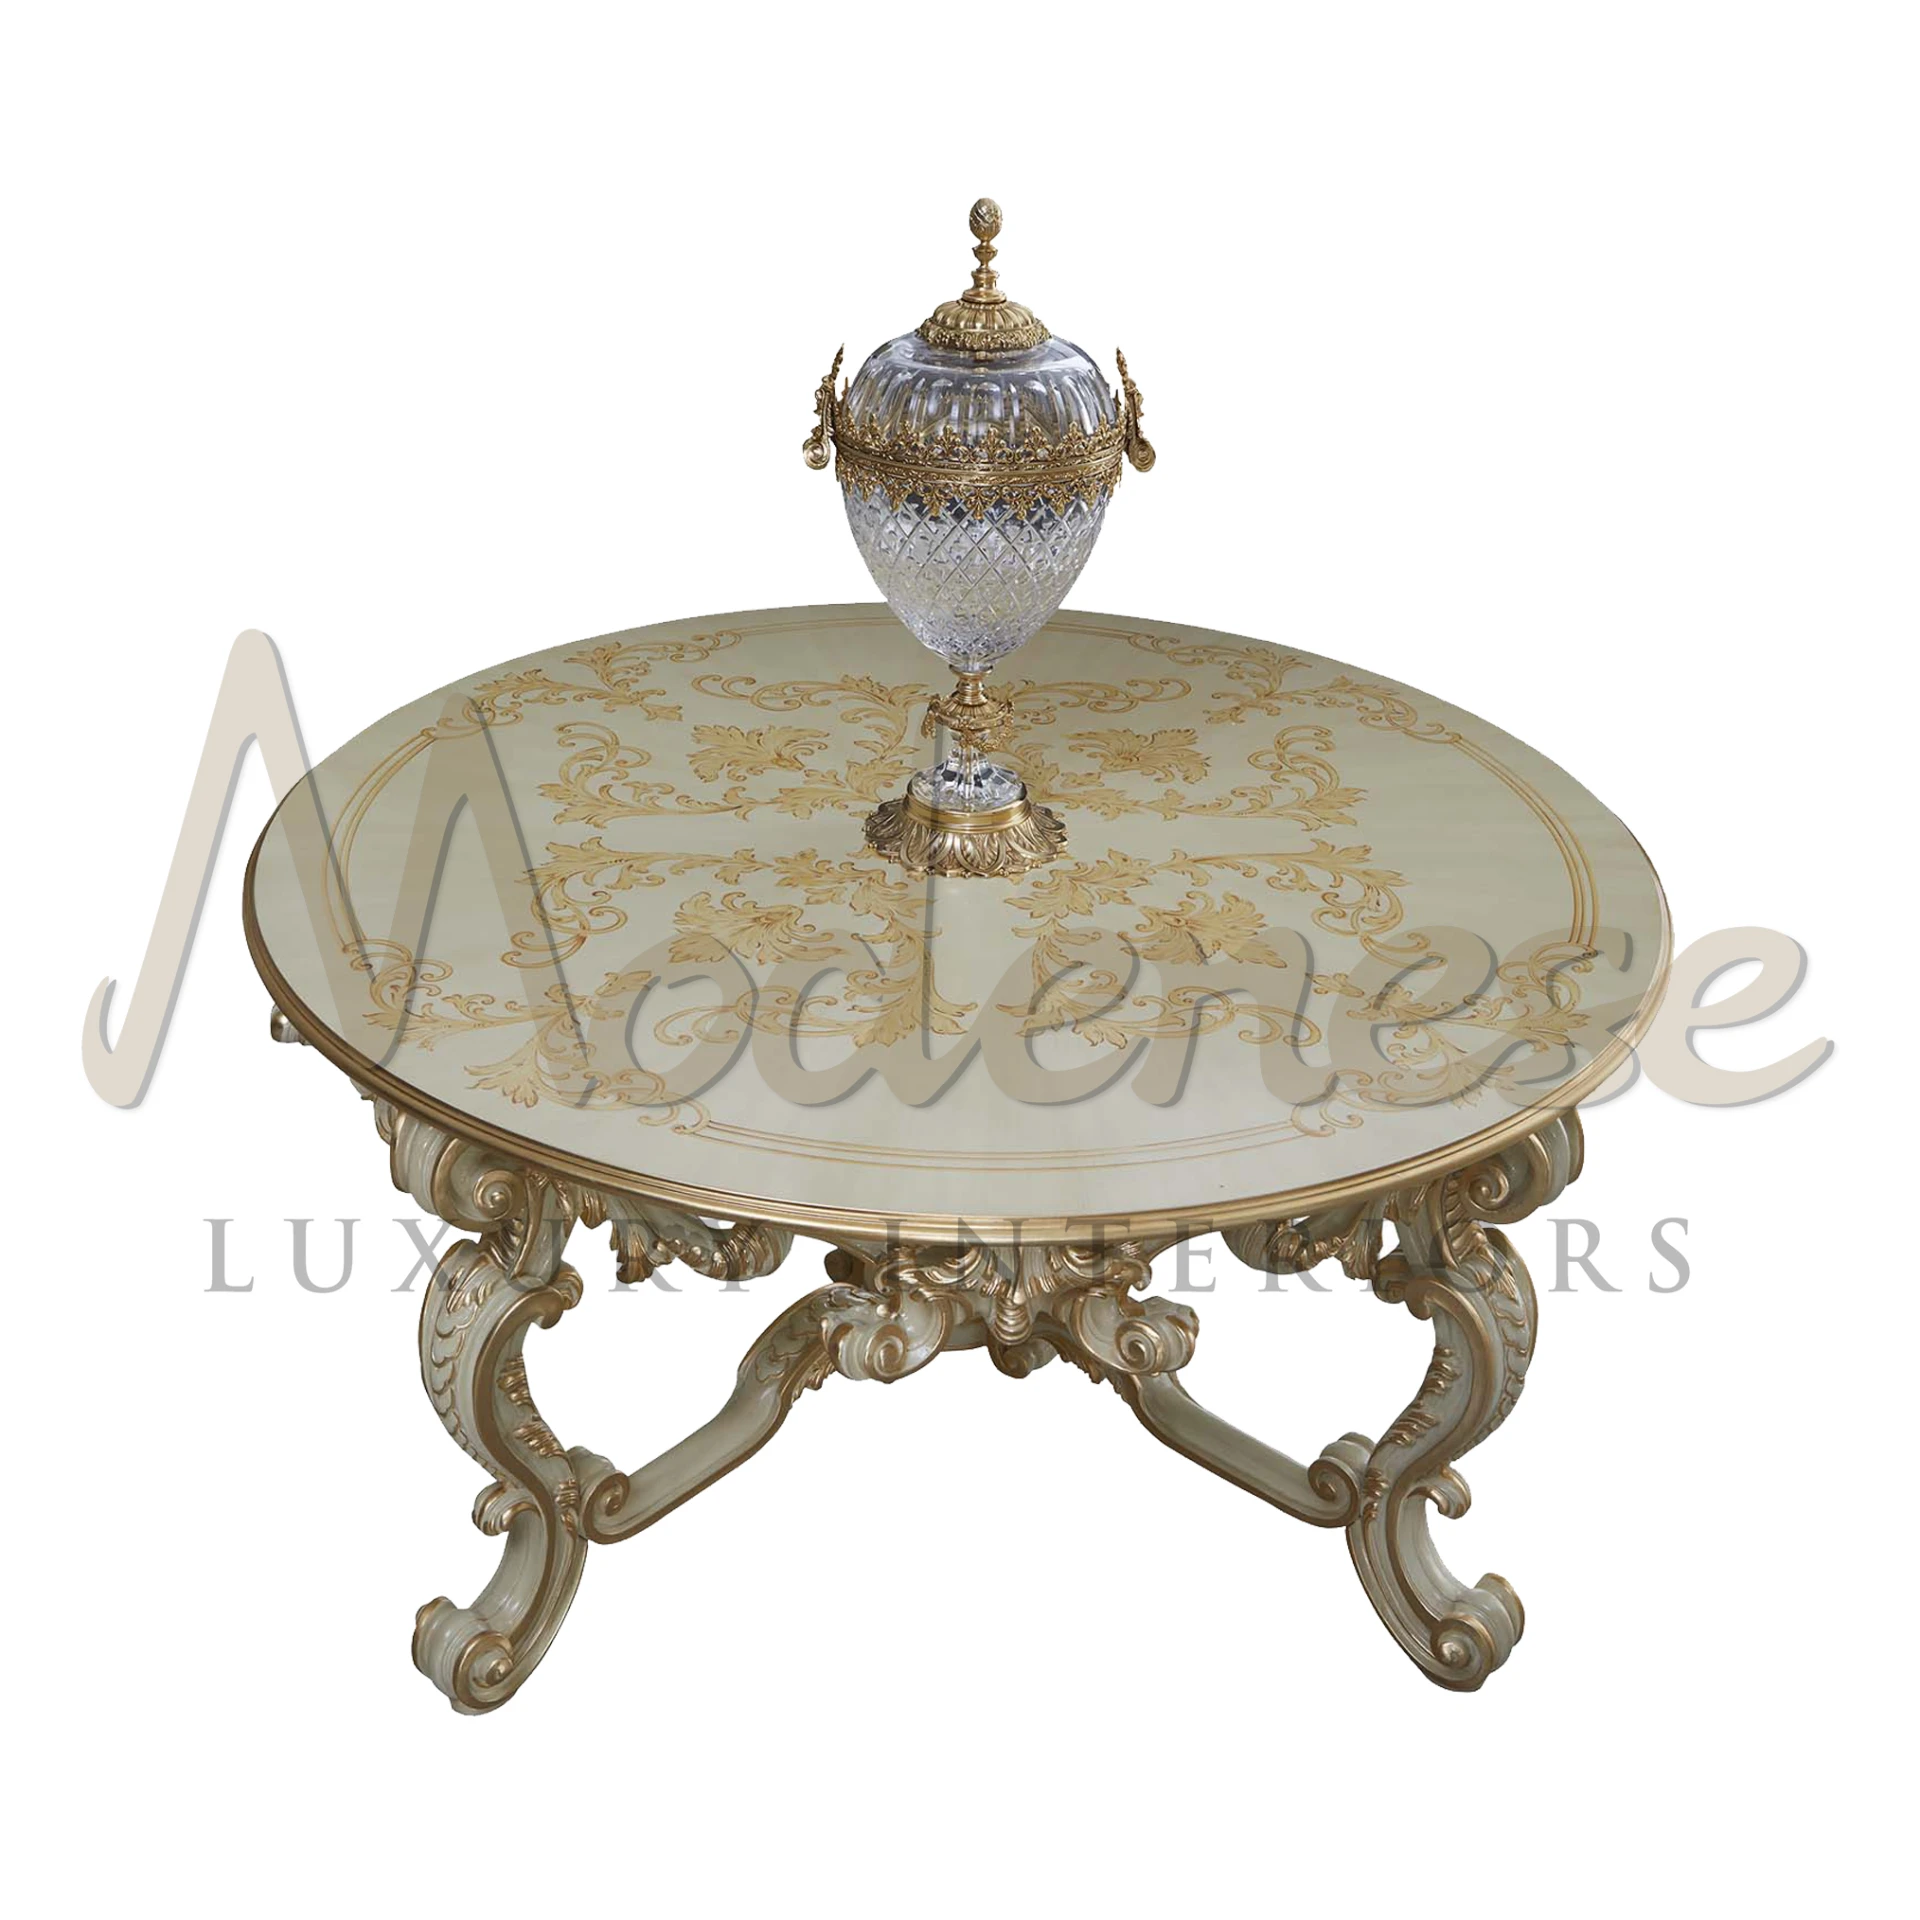 Elegant Victorian Central Table in Venetian style, with baroque design elements, solid wood, and unique ivory finishing for luxury interiors.